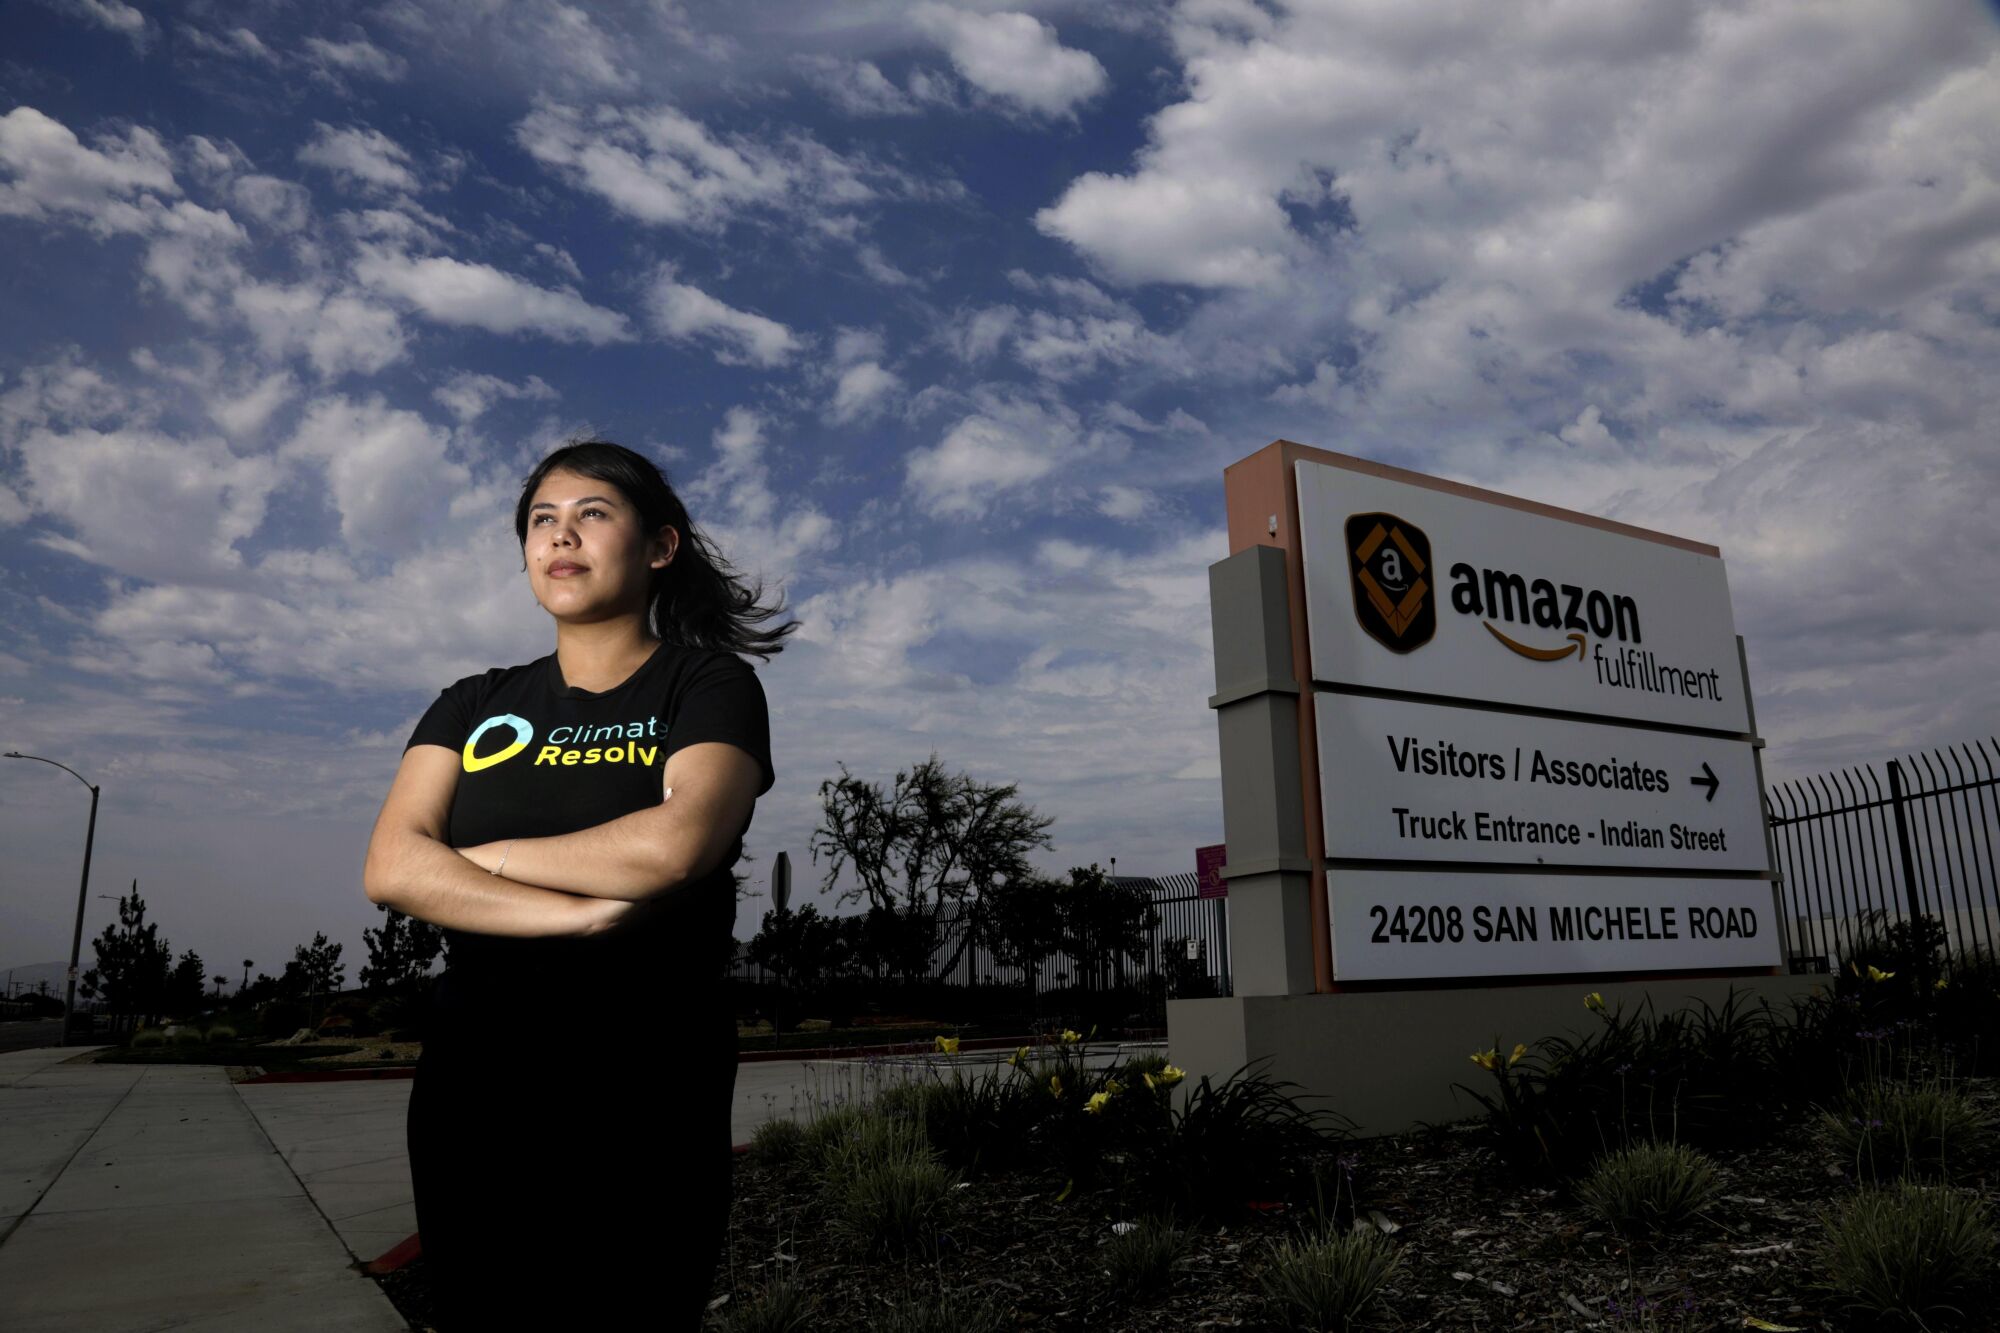 A woman stands next to a sign that says, "Amazon Fulfillment"